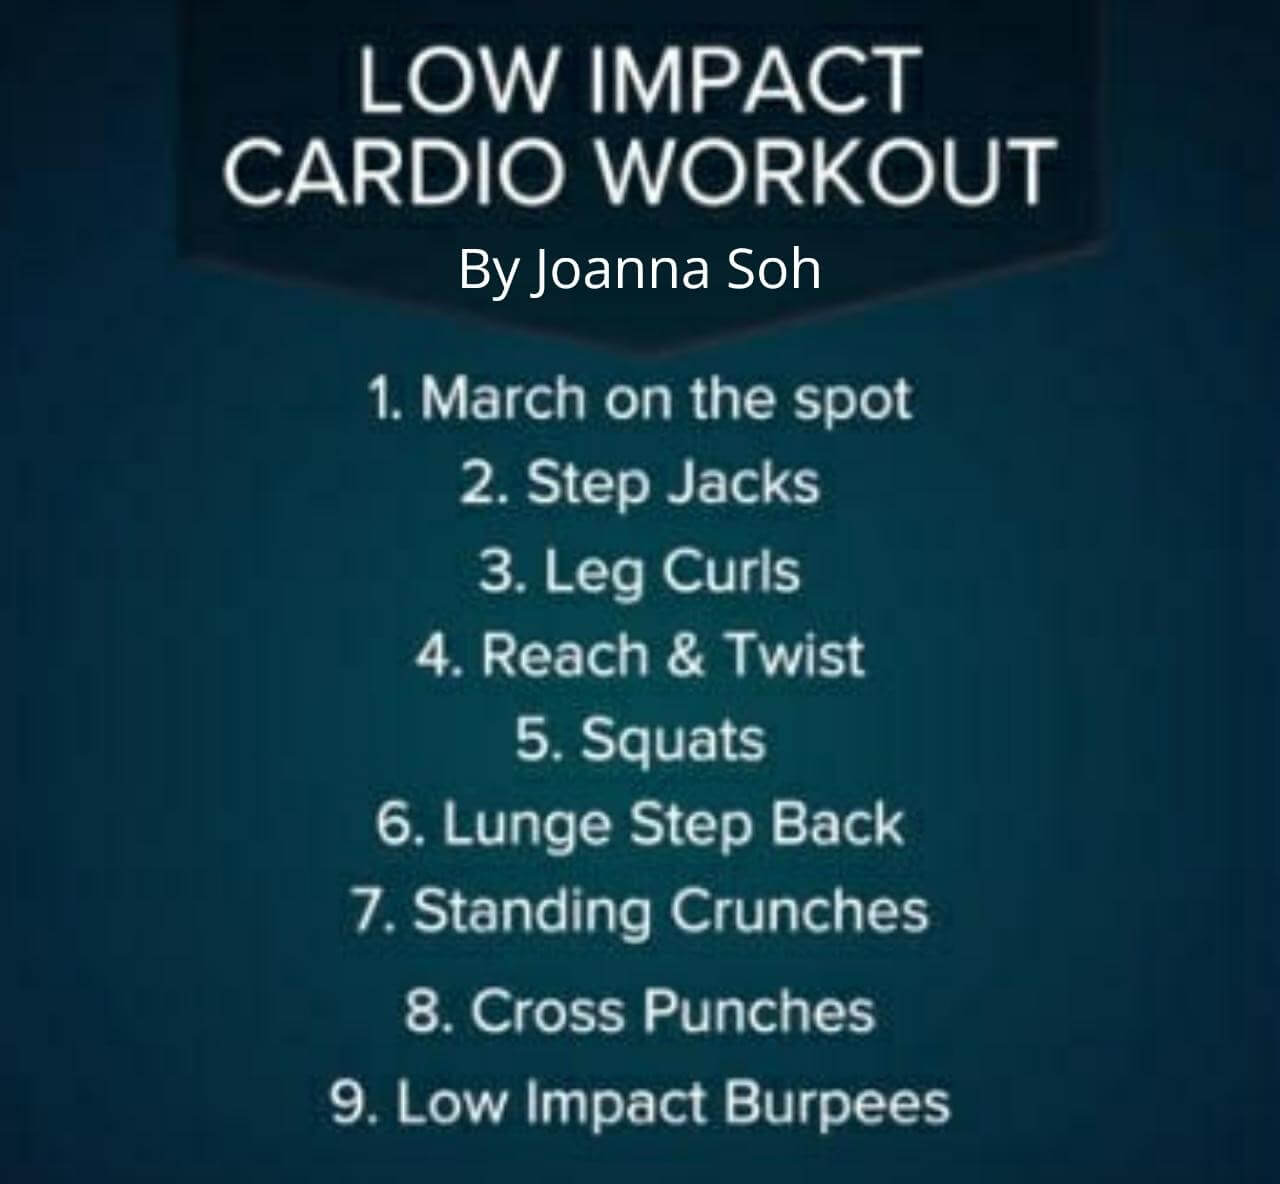 The Best Cardio Exercises for Beginners